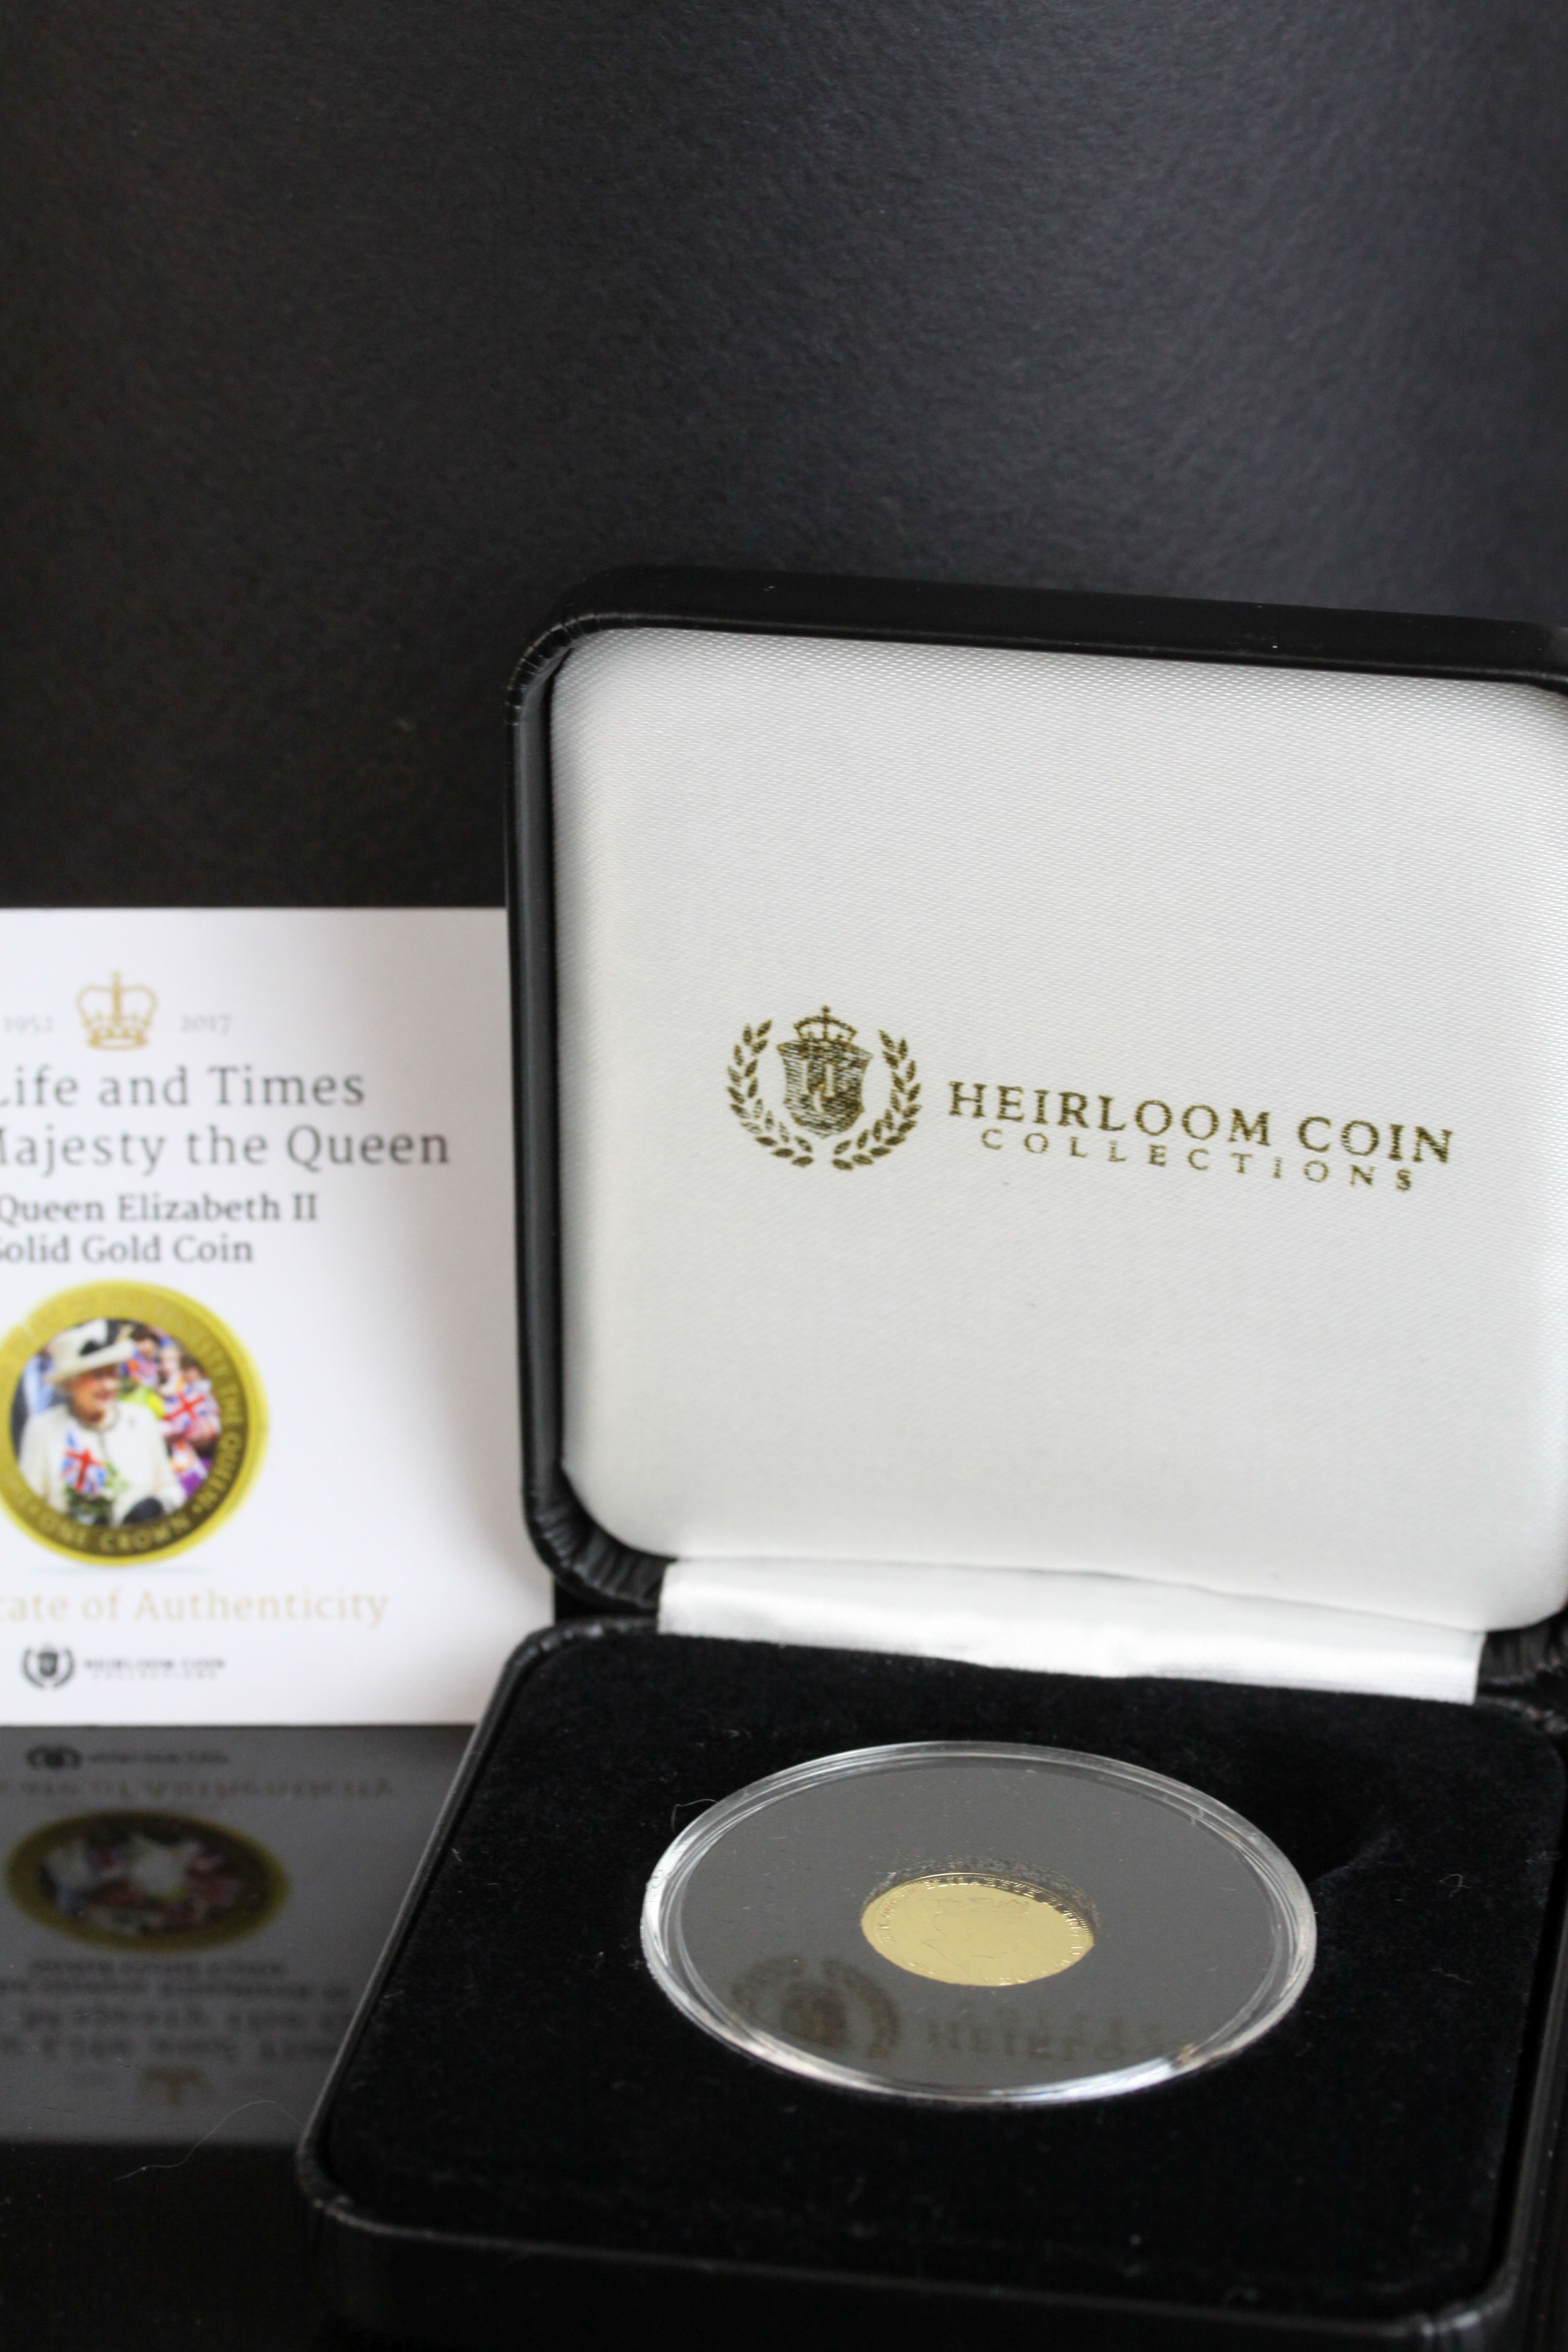 Cased Heirloom Coin Collection The Life and Times of Her Majesty the Queen solid gold coin, 9ct, 1. - Image 3 of 3